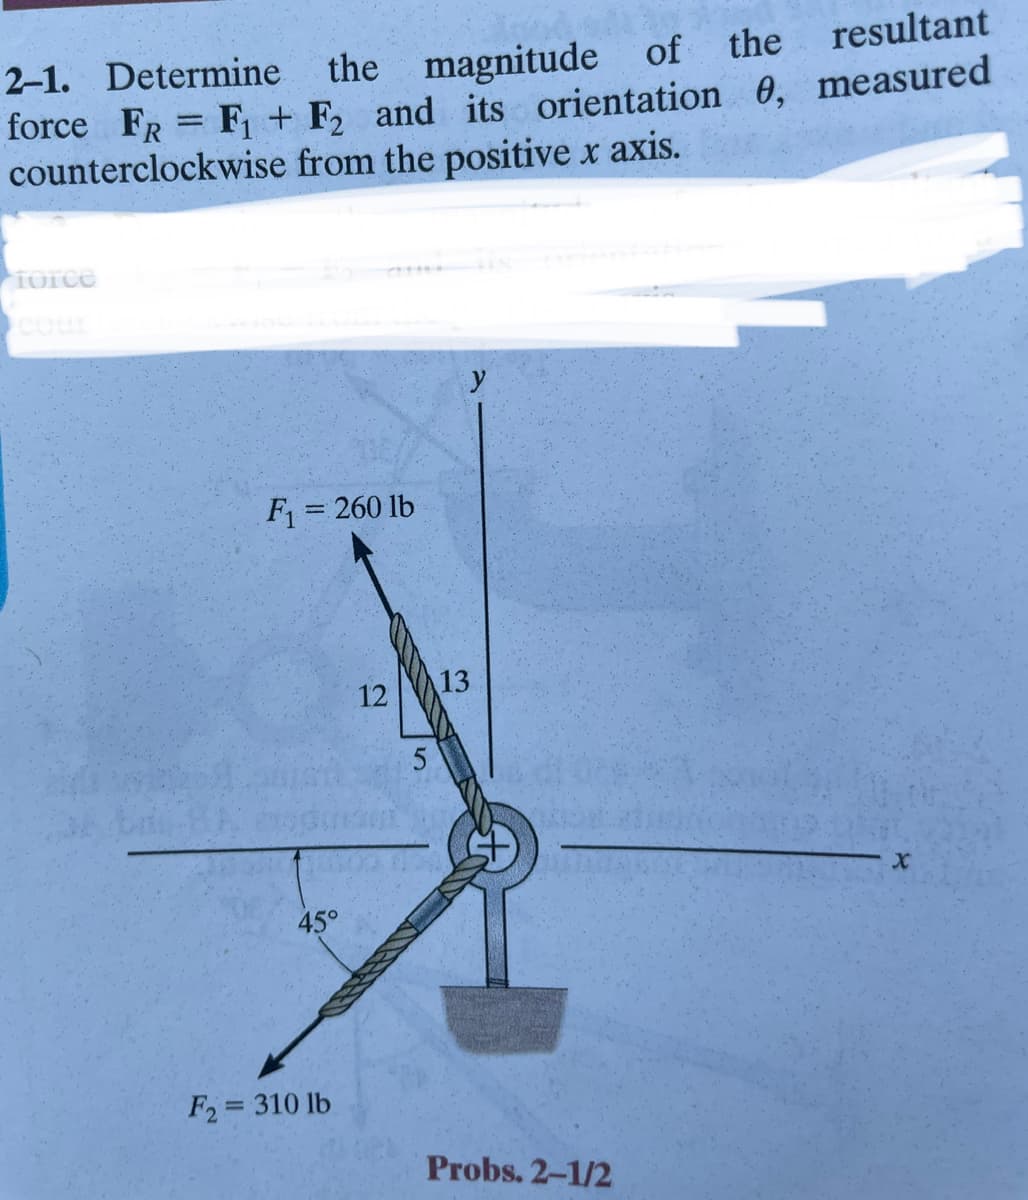 of
2-1. Determine the magnitude of
the
resultant
force FR F₁ + F2 and its orientation 0, measured
counterclockwise from the positive x axis.
force
=
F₁ = 260 lb
45°
F2 = 310 lb
12
5
13
Probs. 2-1/2